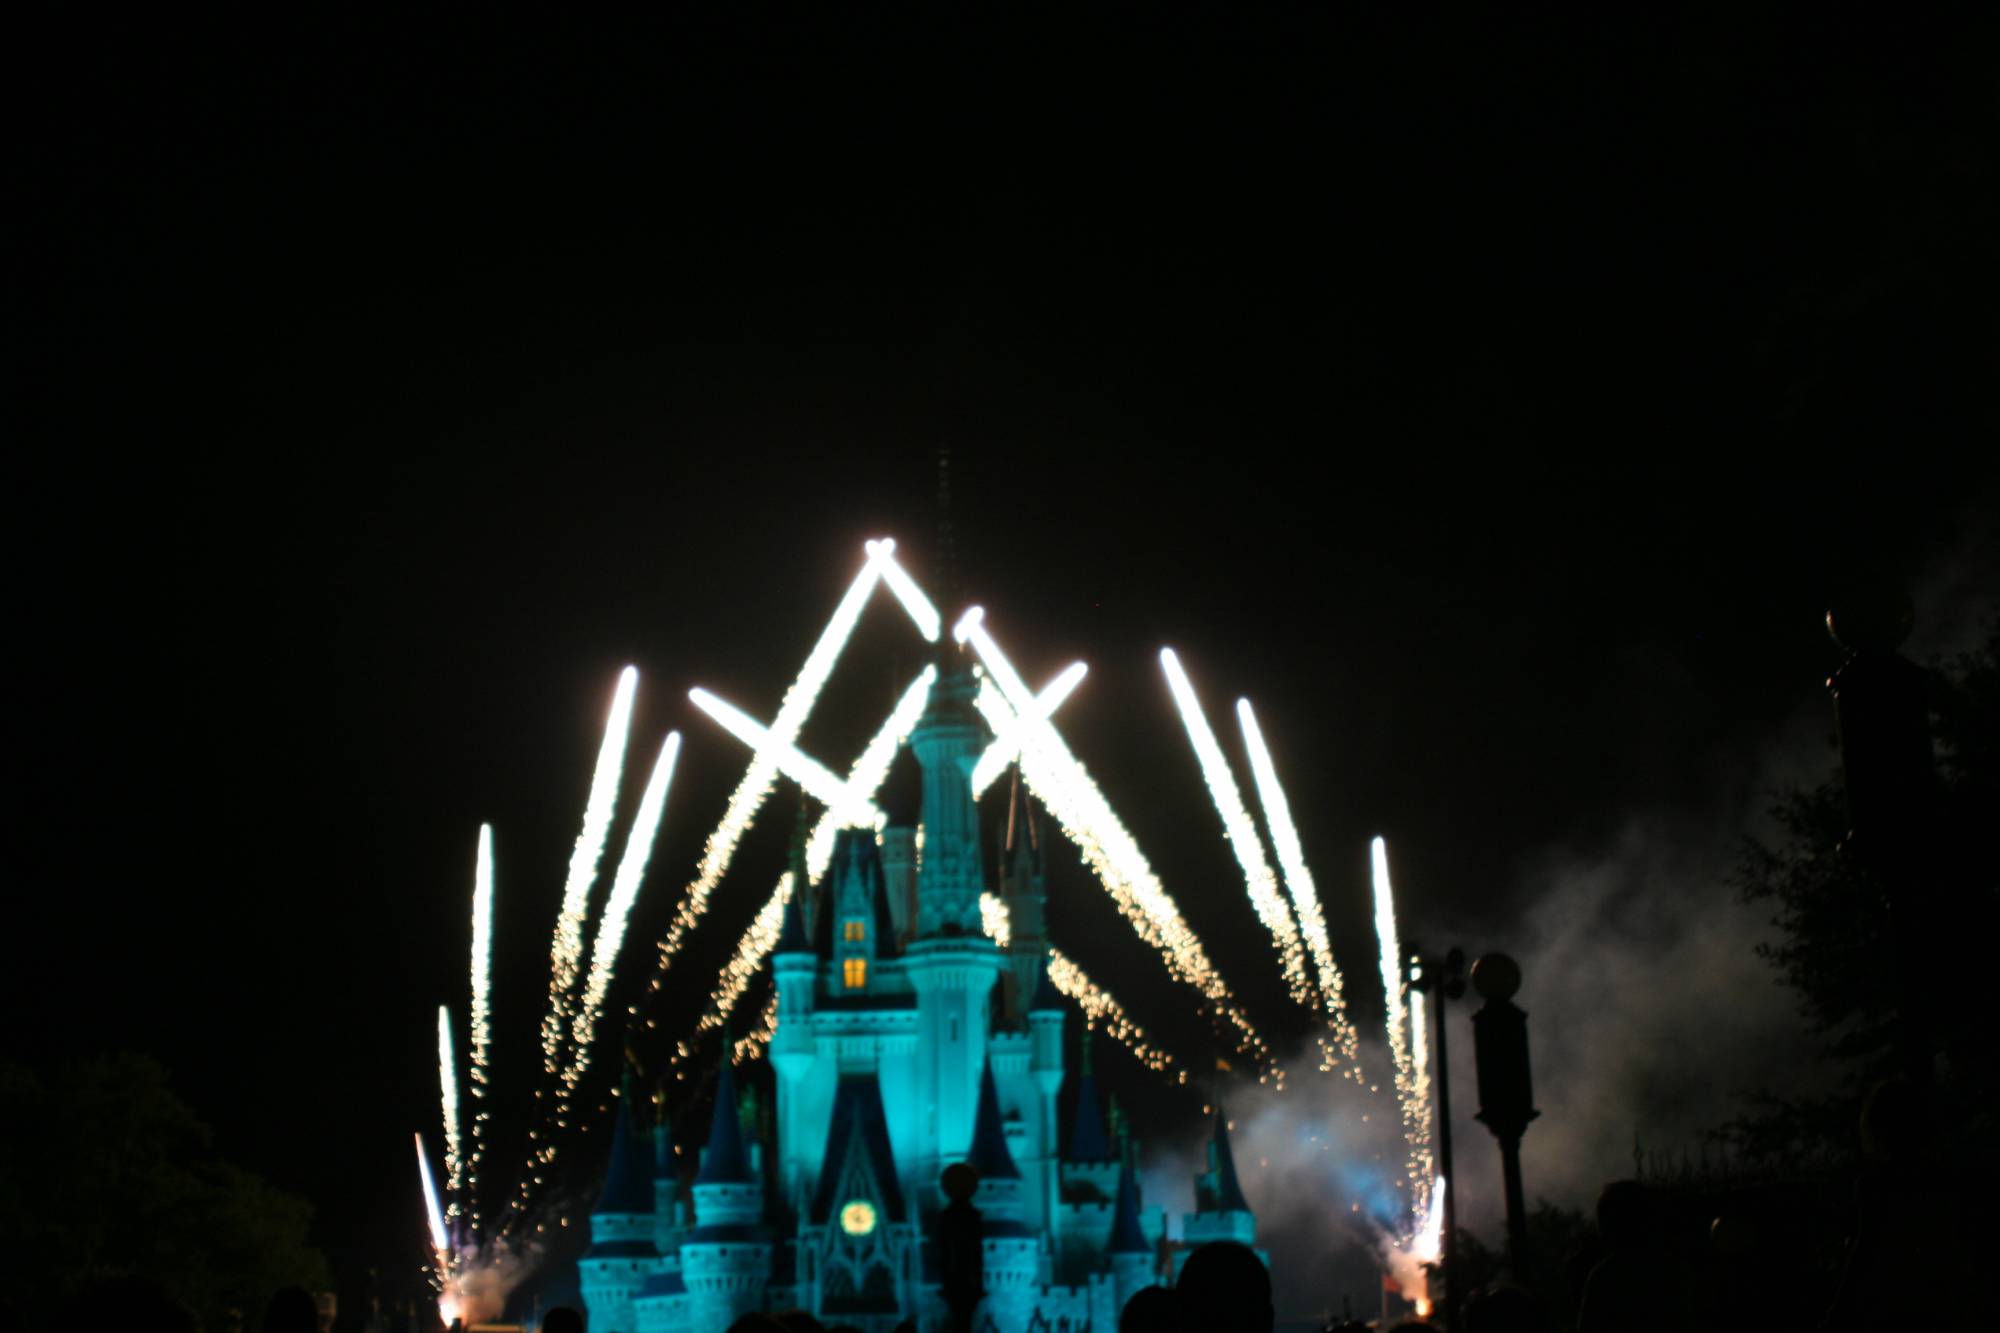 wishes